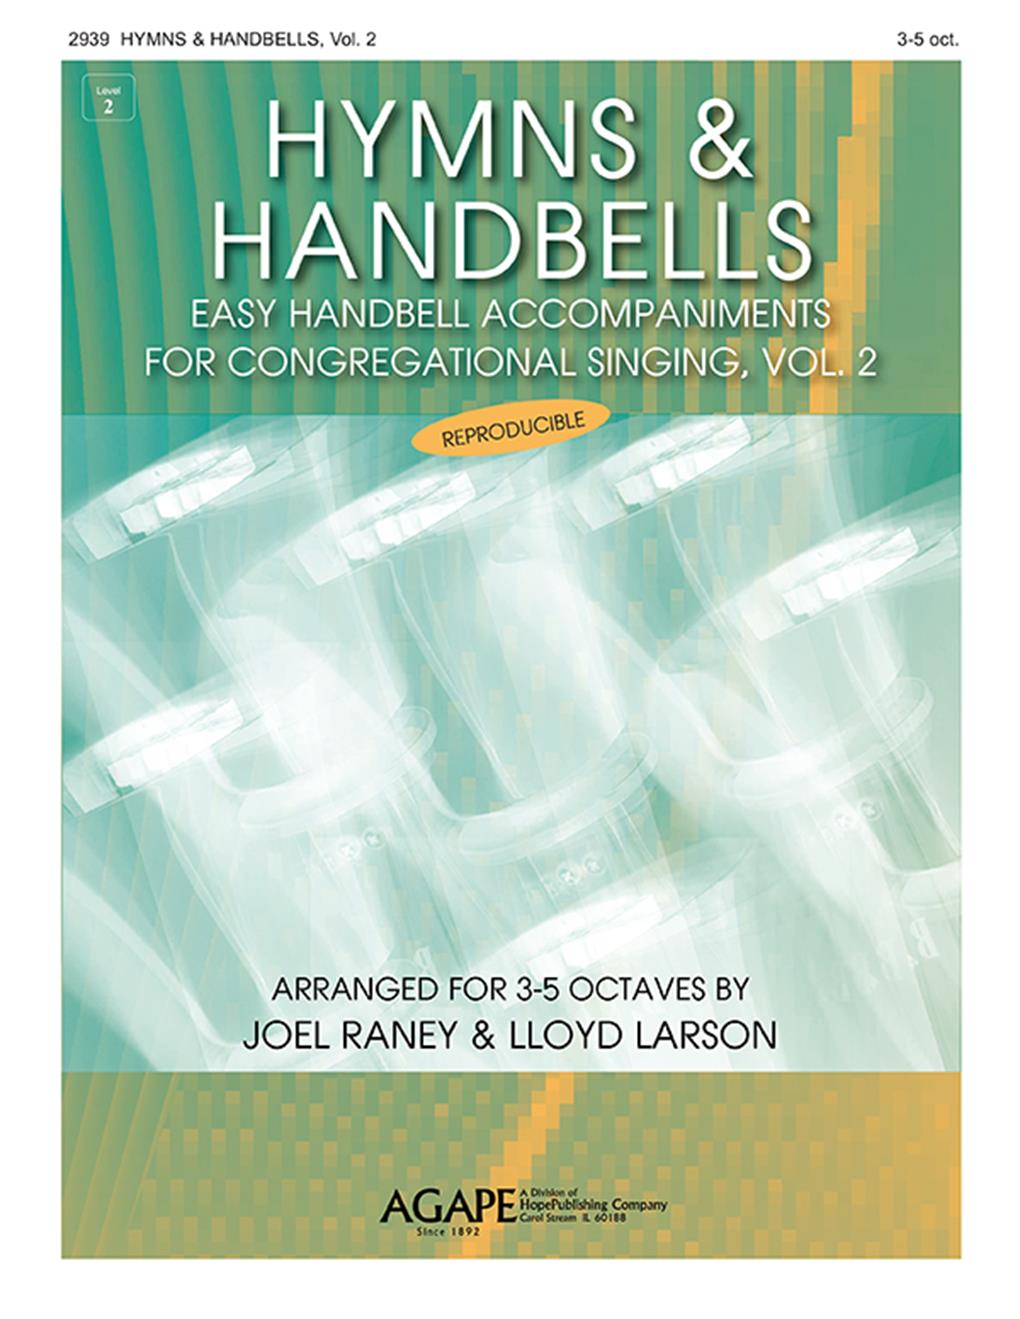 Hymns and Handbells for 3-5 Oct. Vol. 2 (Reproducible) Cover Image